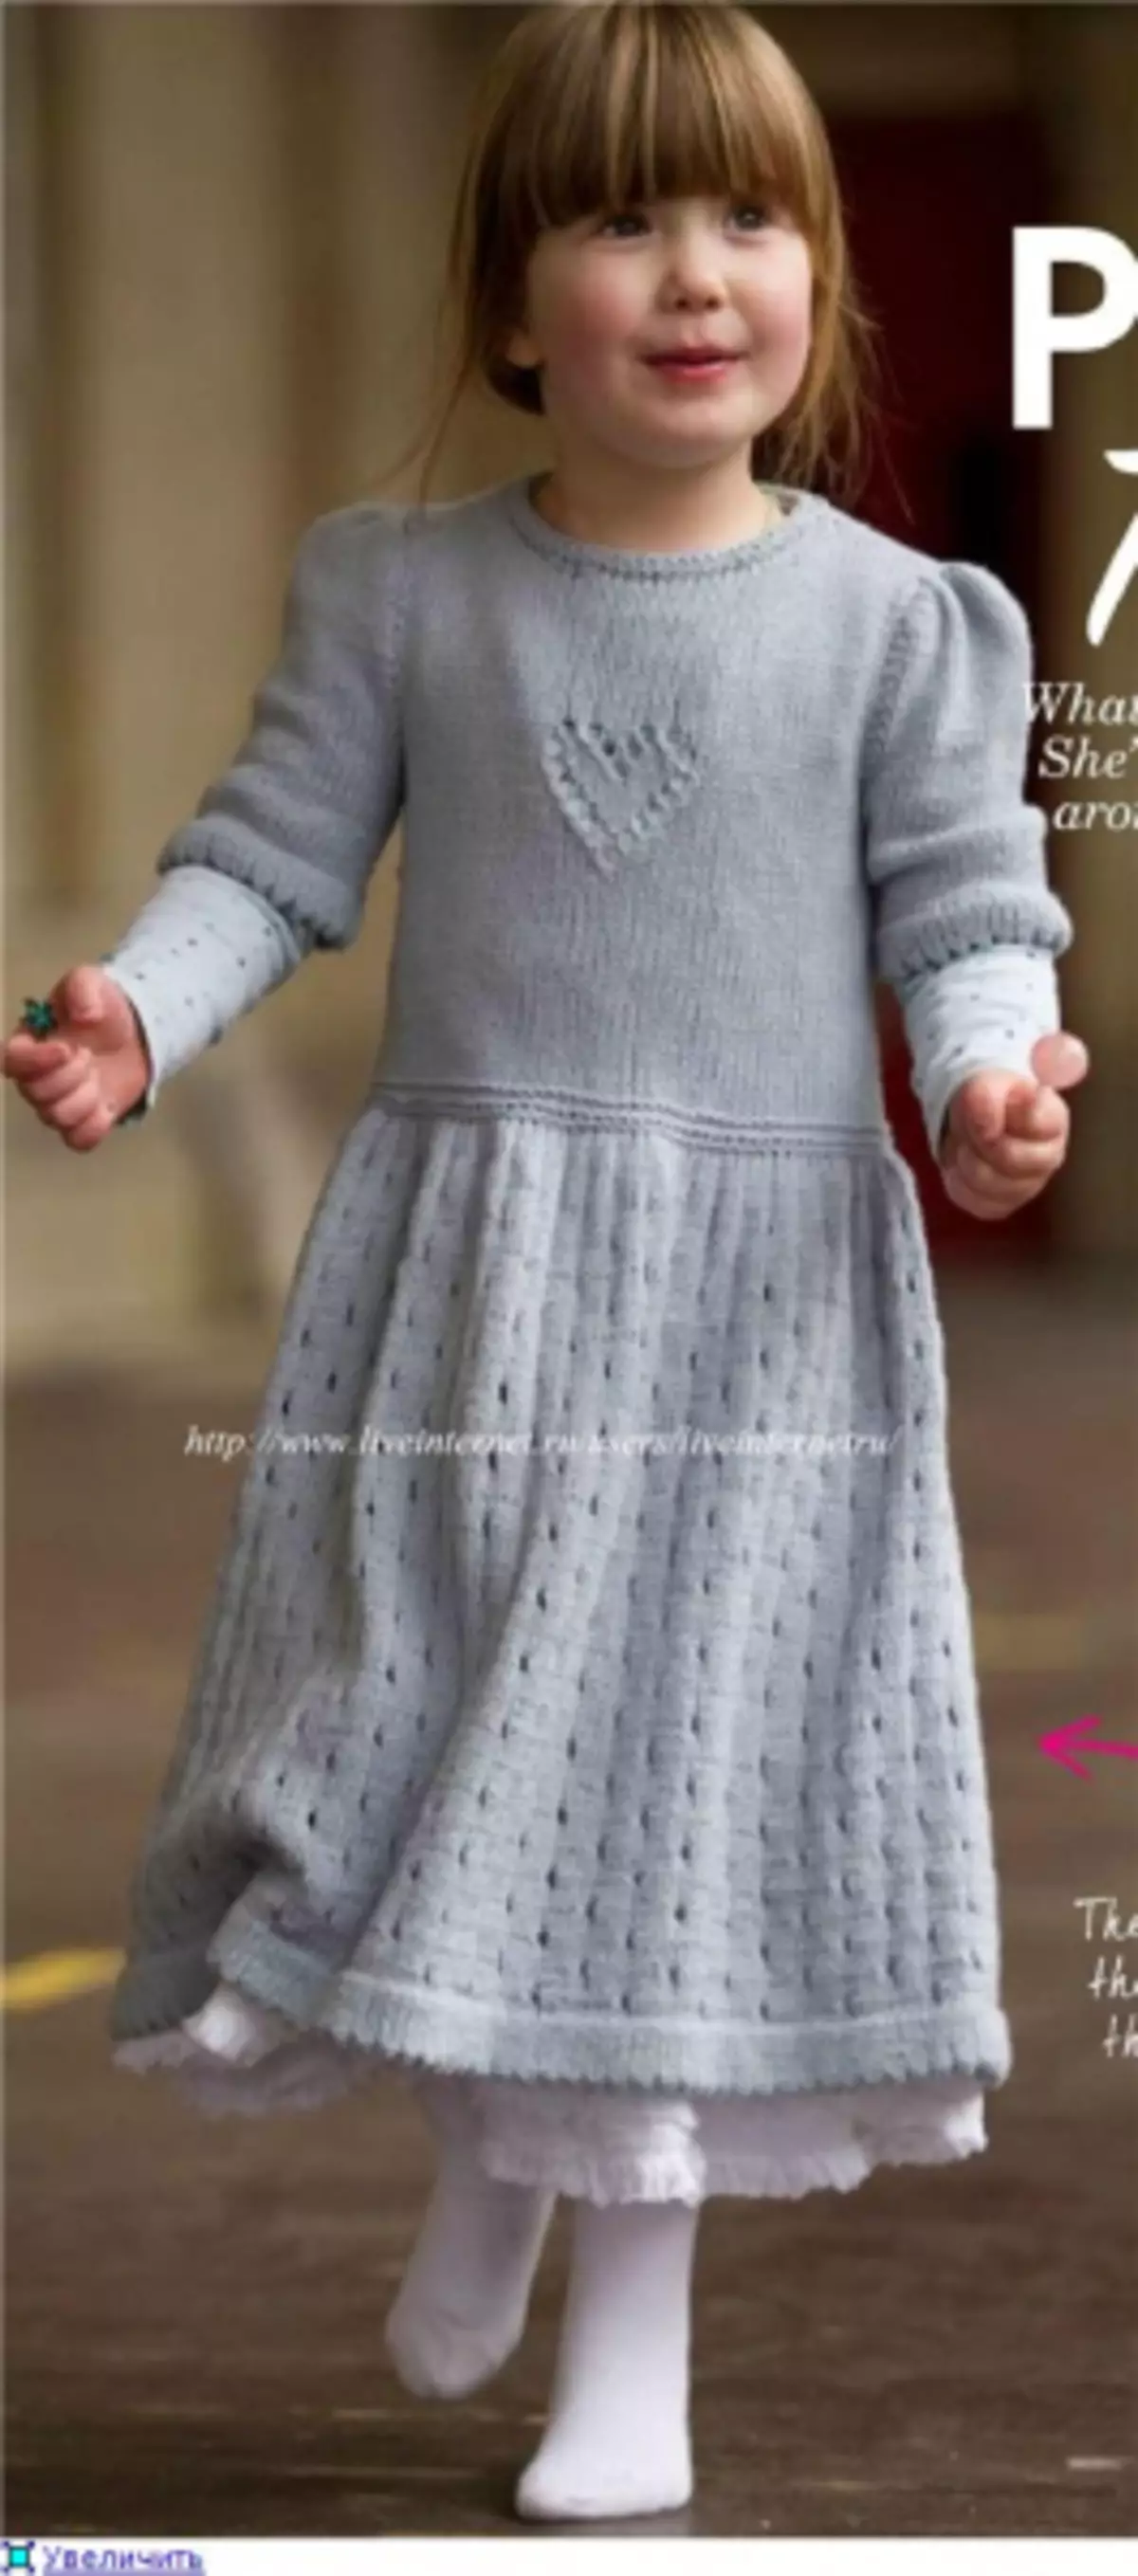 Knitted dress for girls with knitting with diagrams and descriptions: I practice knitting for babes